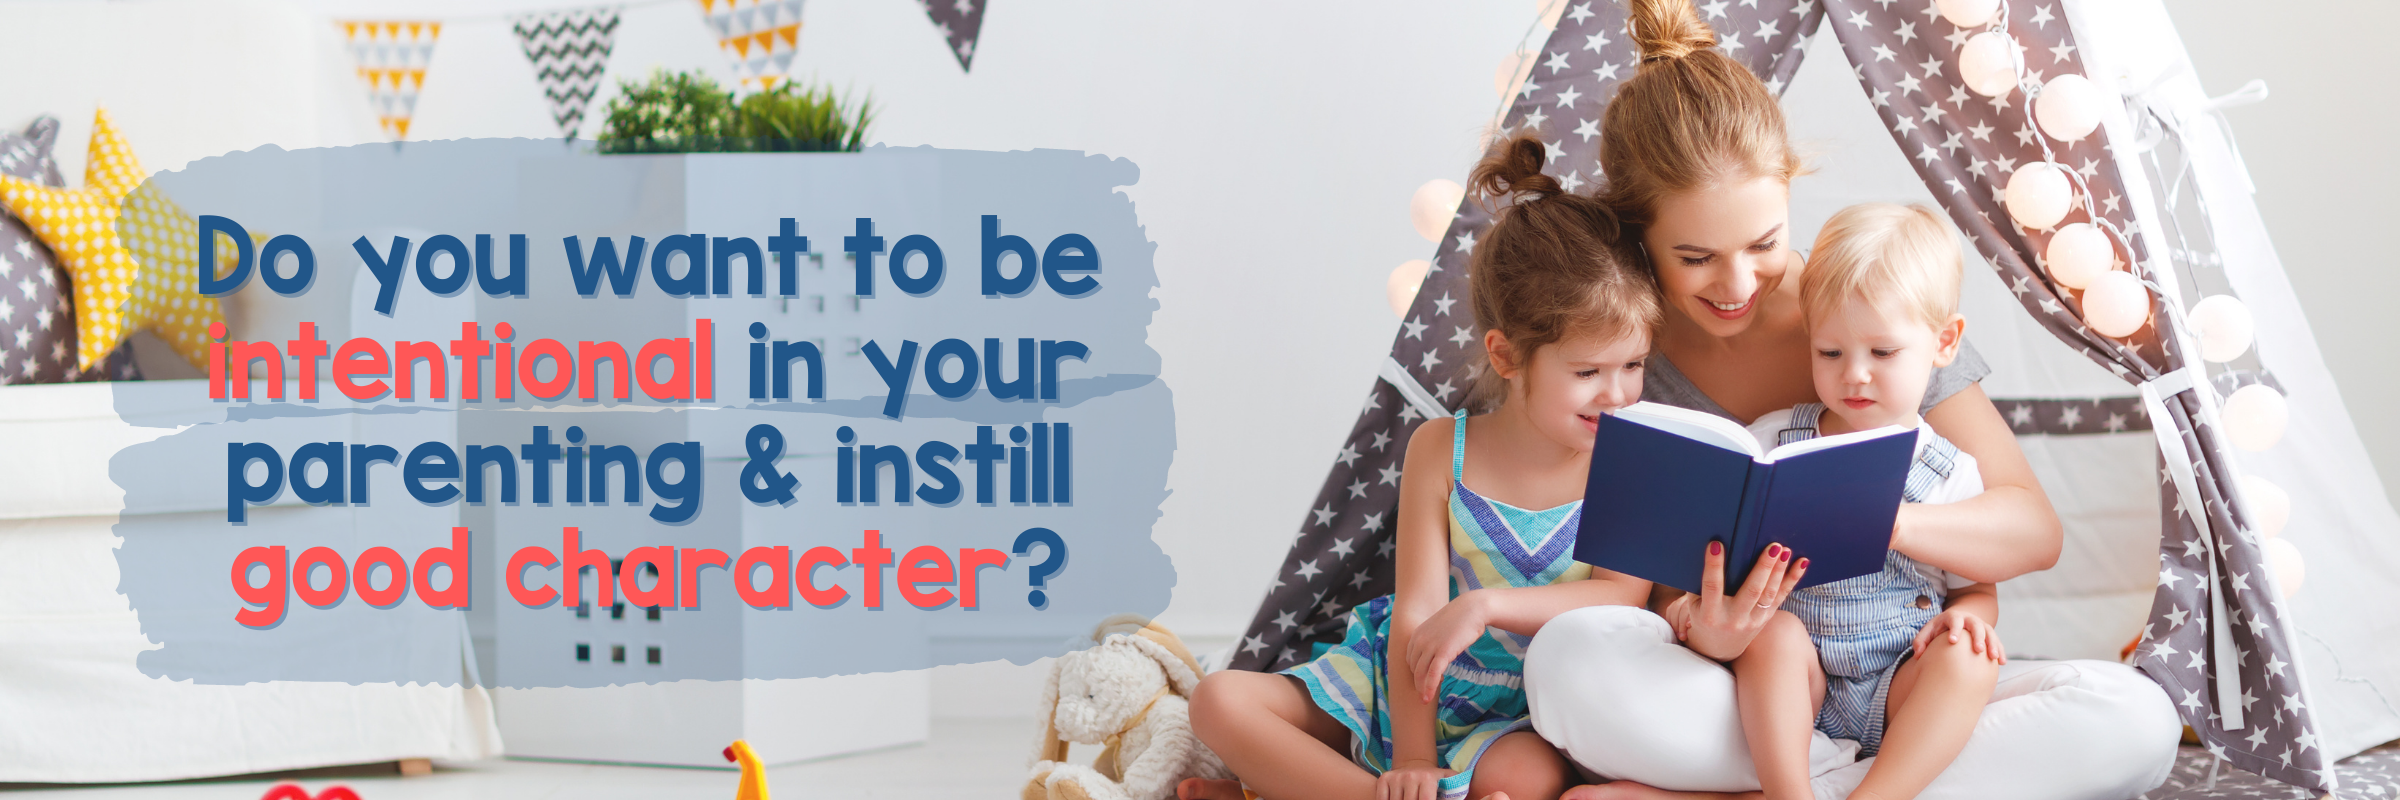 Want to instill good character in your kids?